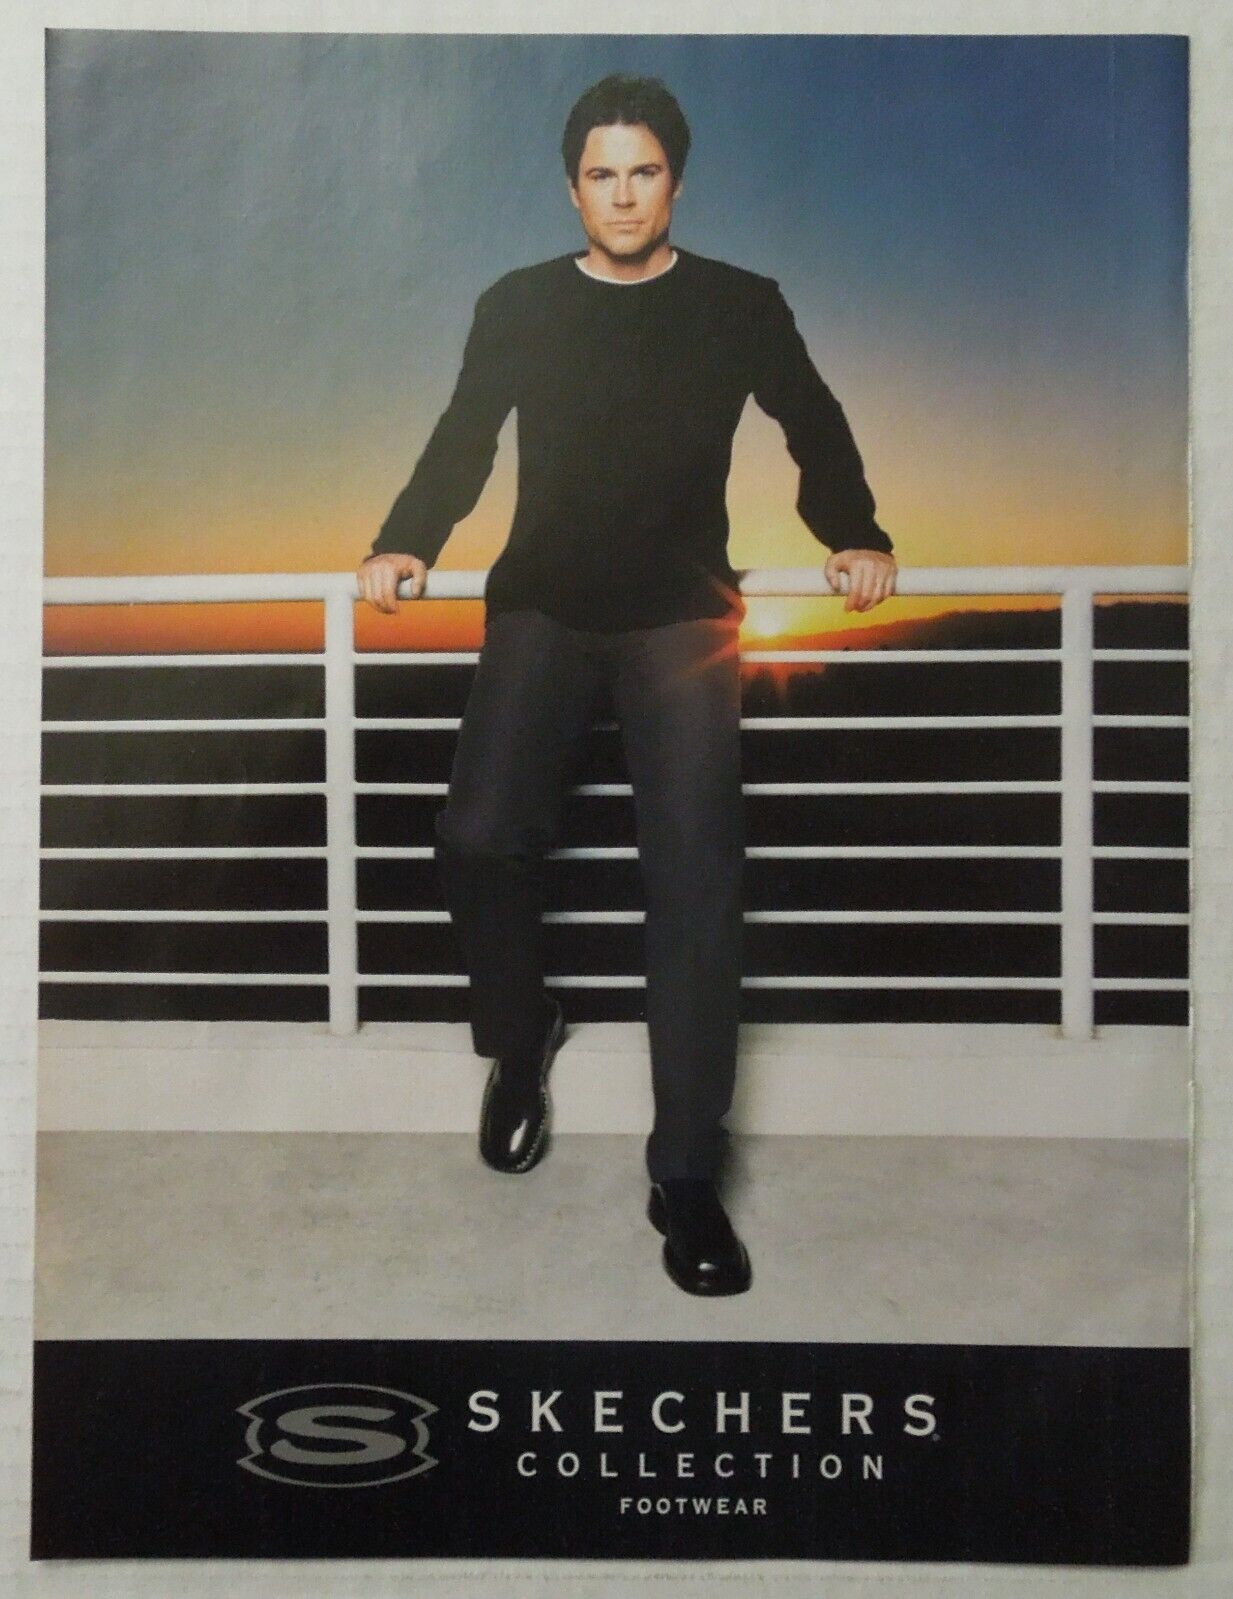 2001 SKECHERS Collection Footwear Magazine Ad - Actor ROB LOWE